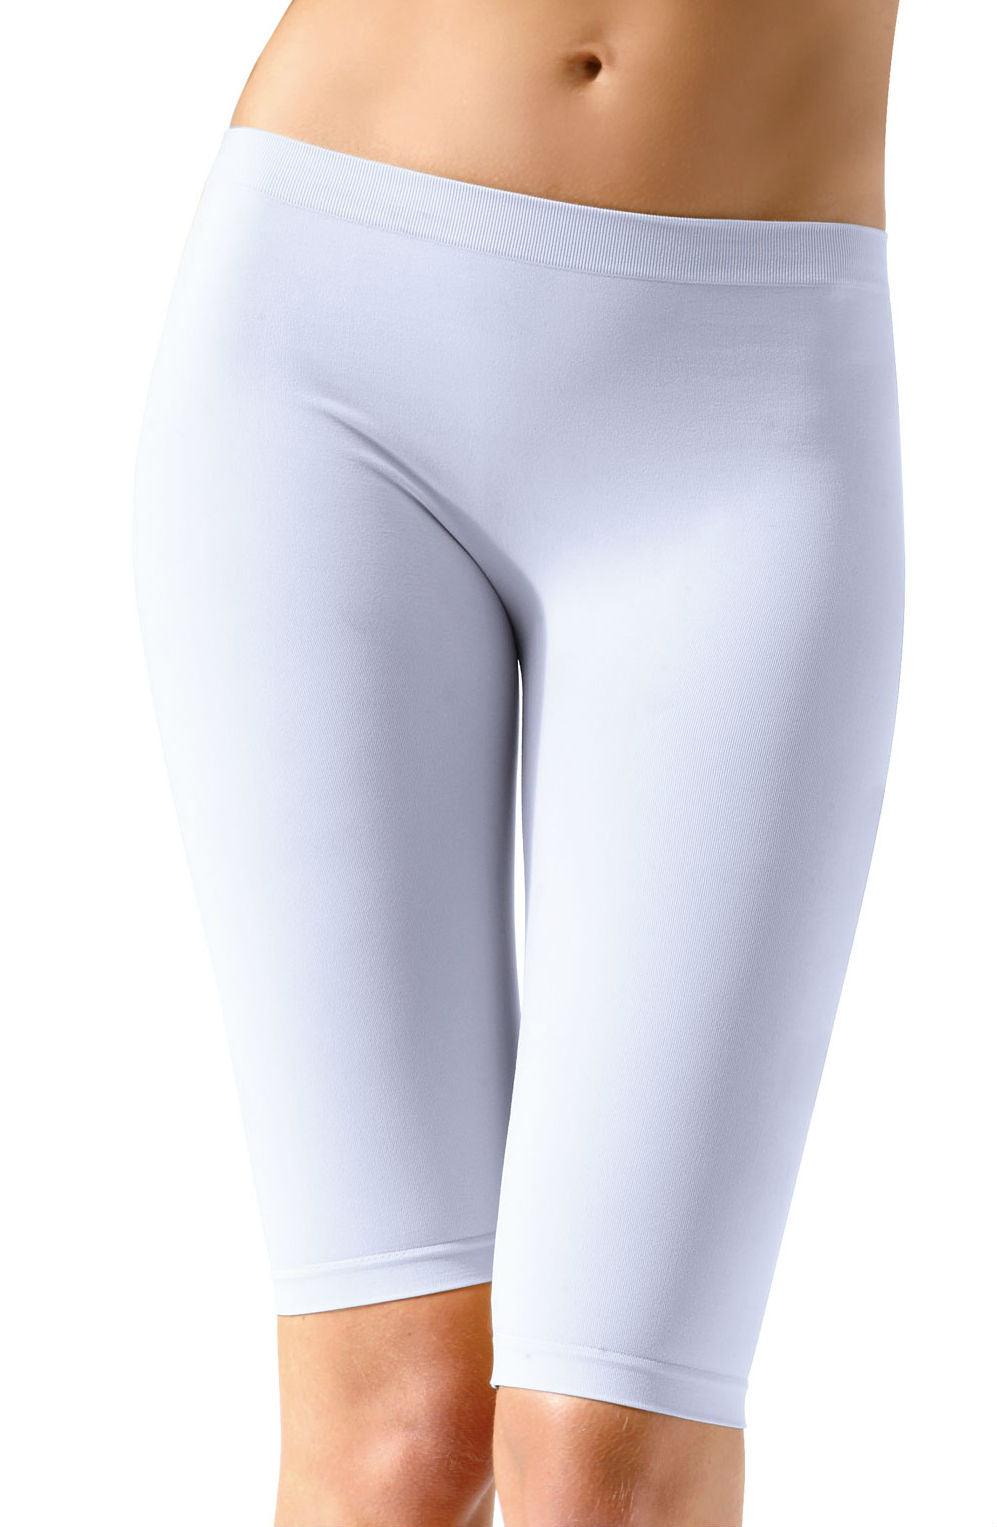 Control Body 410600A Infused Shaping Leggings Bianco - Sydney Rose Lingerie 